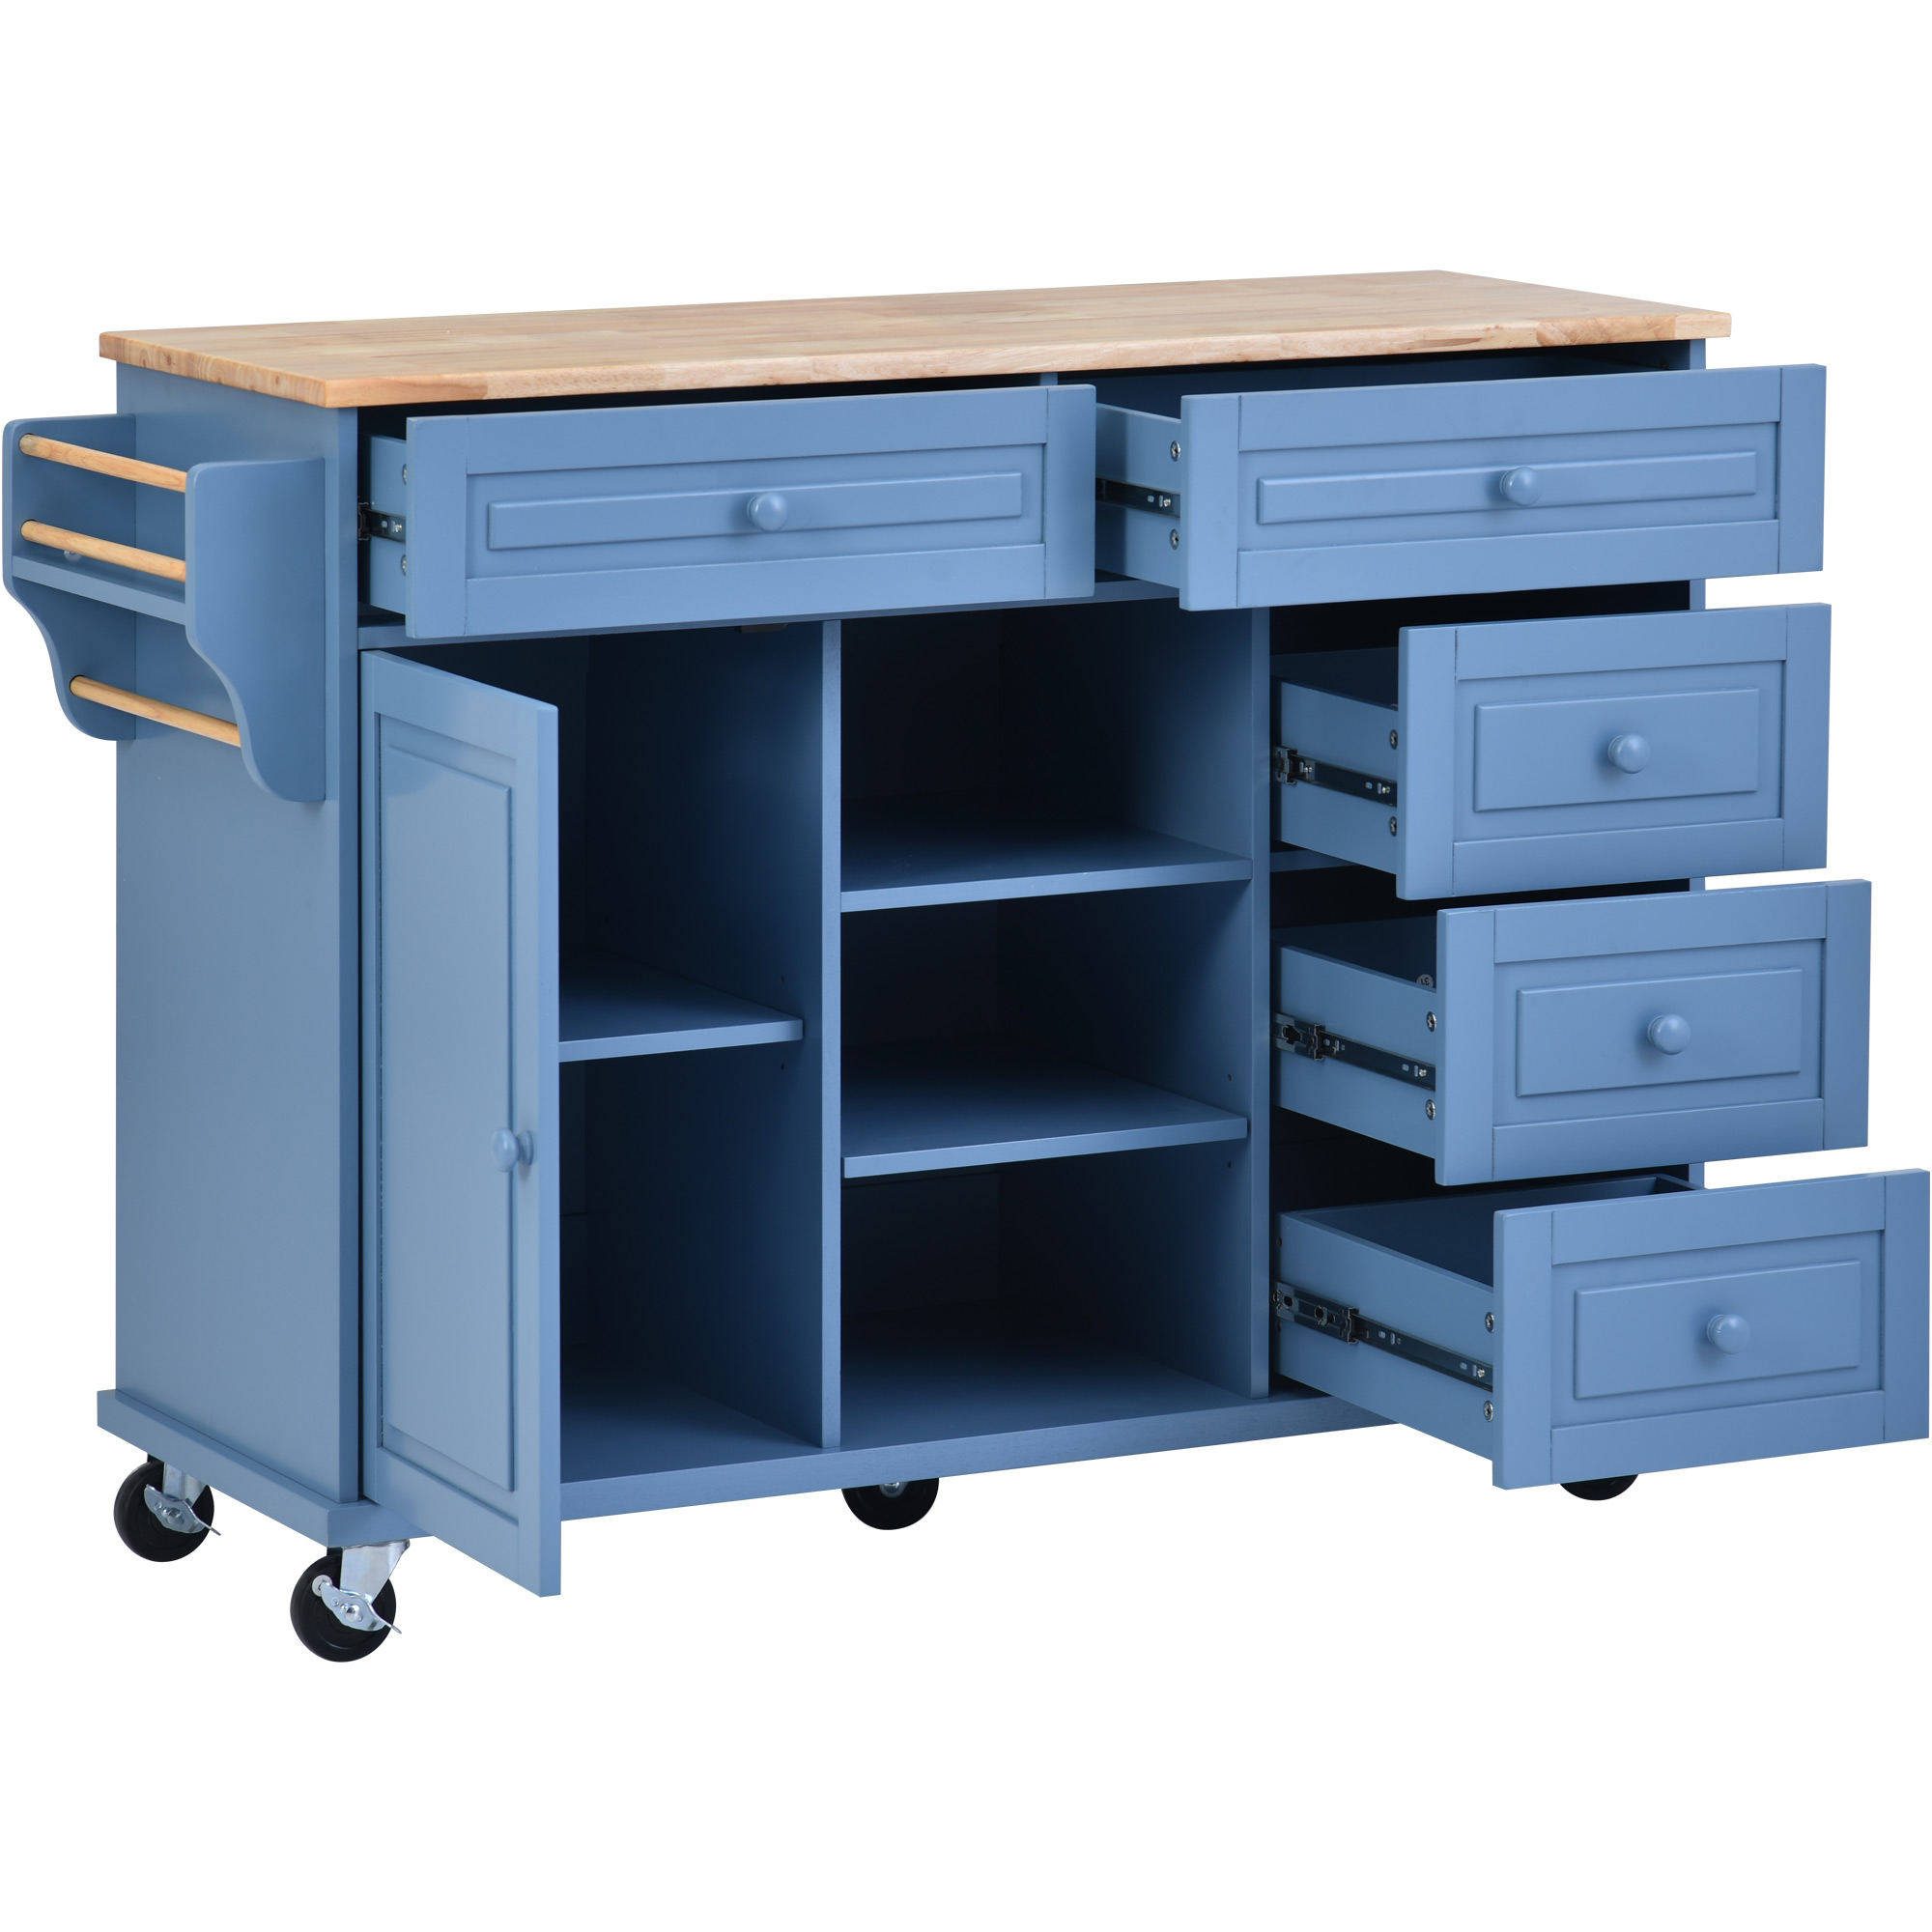 Rolling Mobile Kitchen Island With Storage And 5 Draws - WF297003AAG